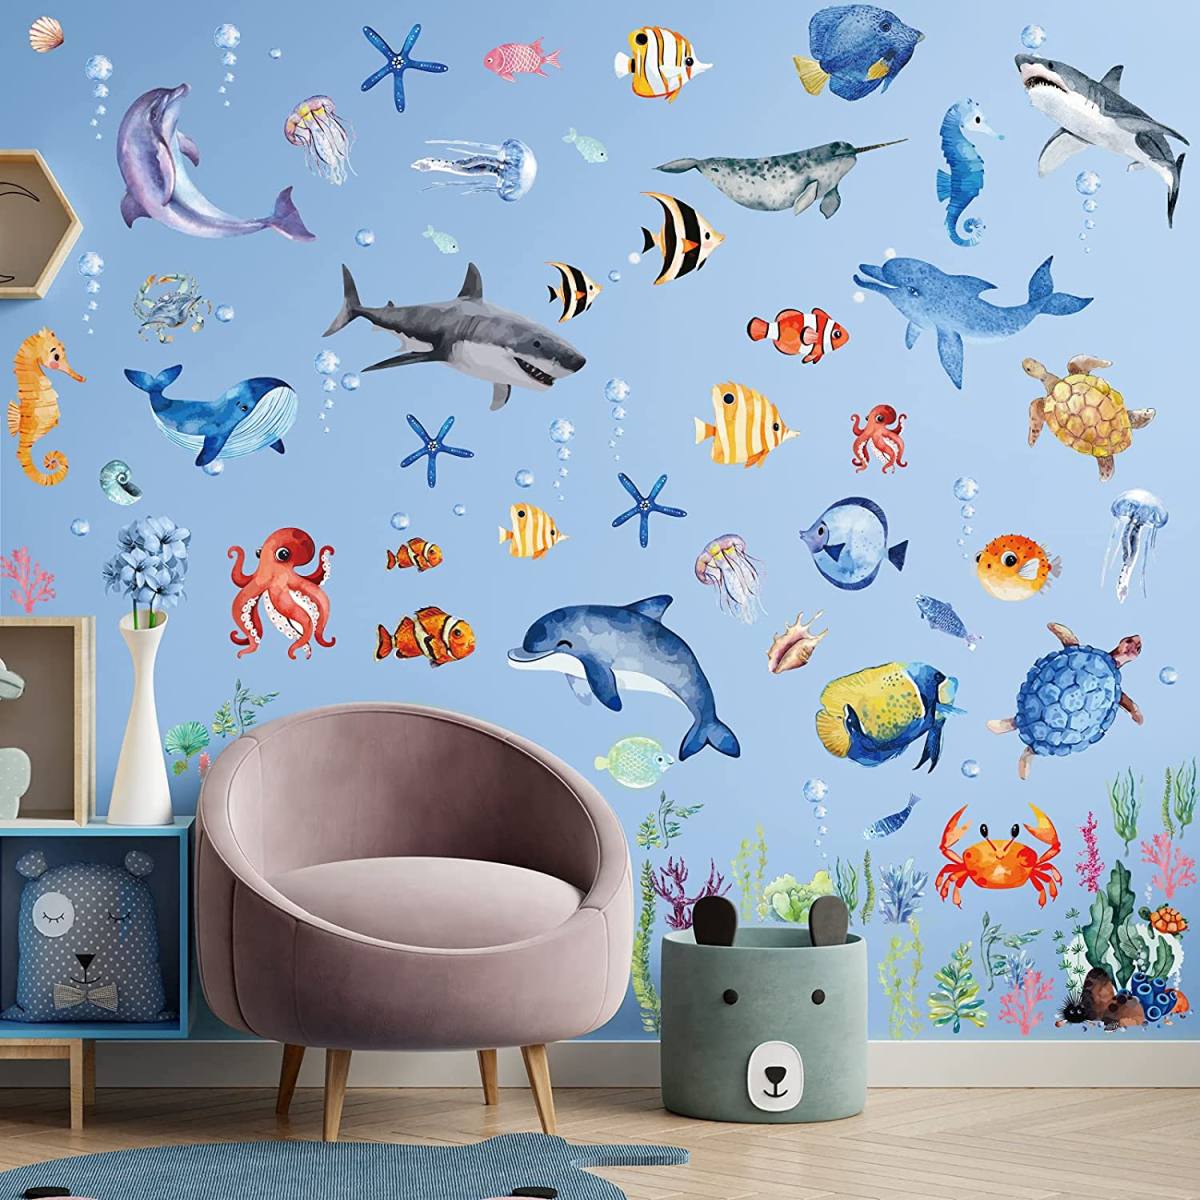 Baby Shark Family Wall Decals - Baby Shark Wall Decals with 3D Augmented Reality Interaction - Baby Shark Room Decor